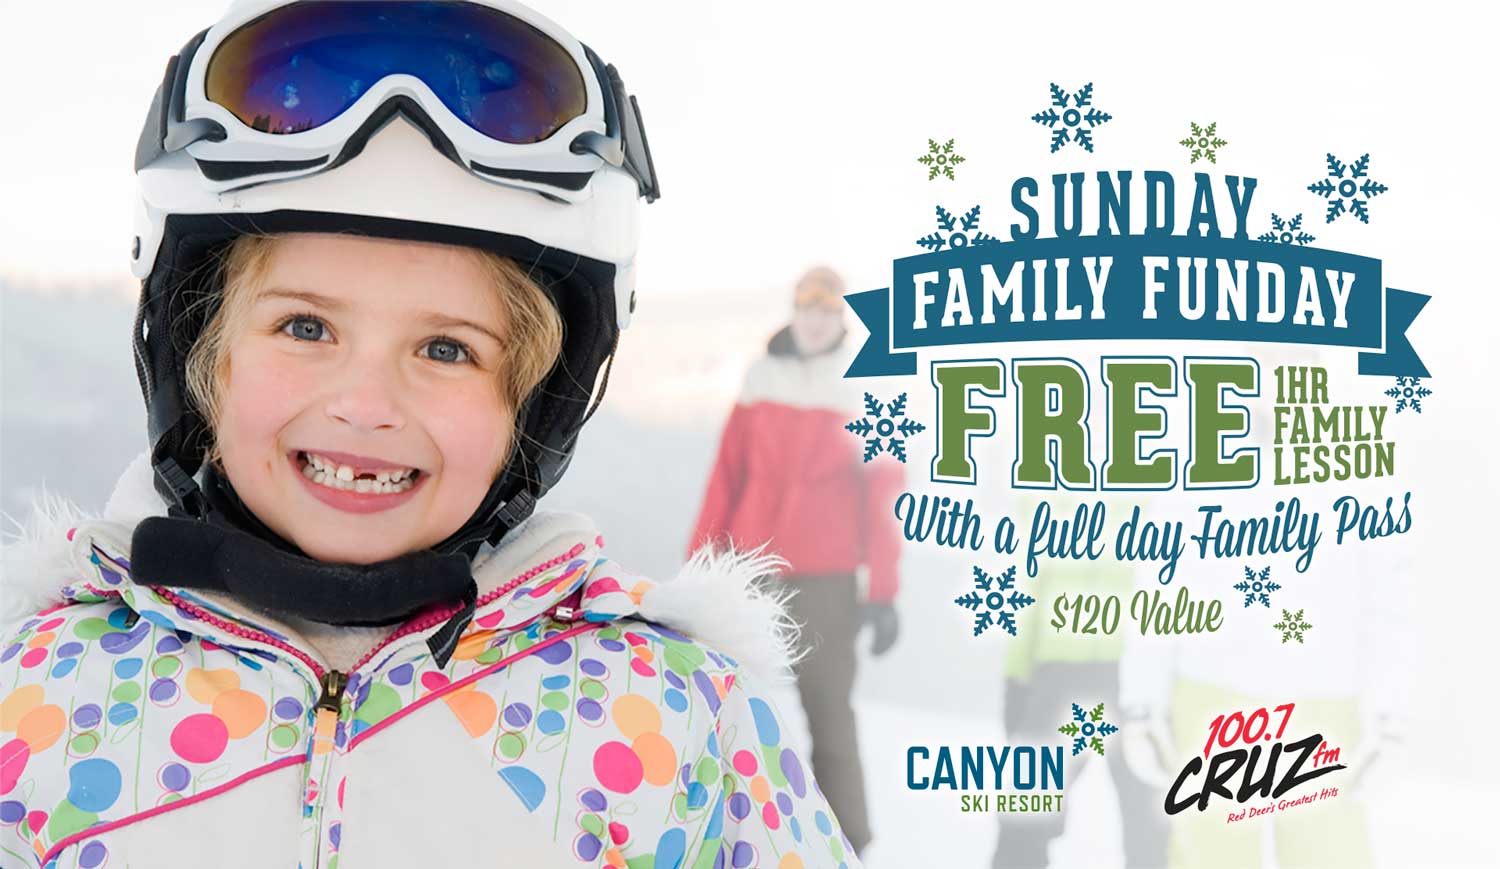 Sunday Family Funday - Free Family Lesson with Family Pass